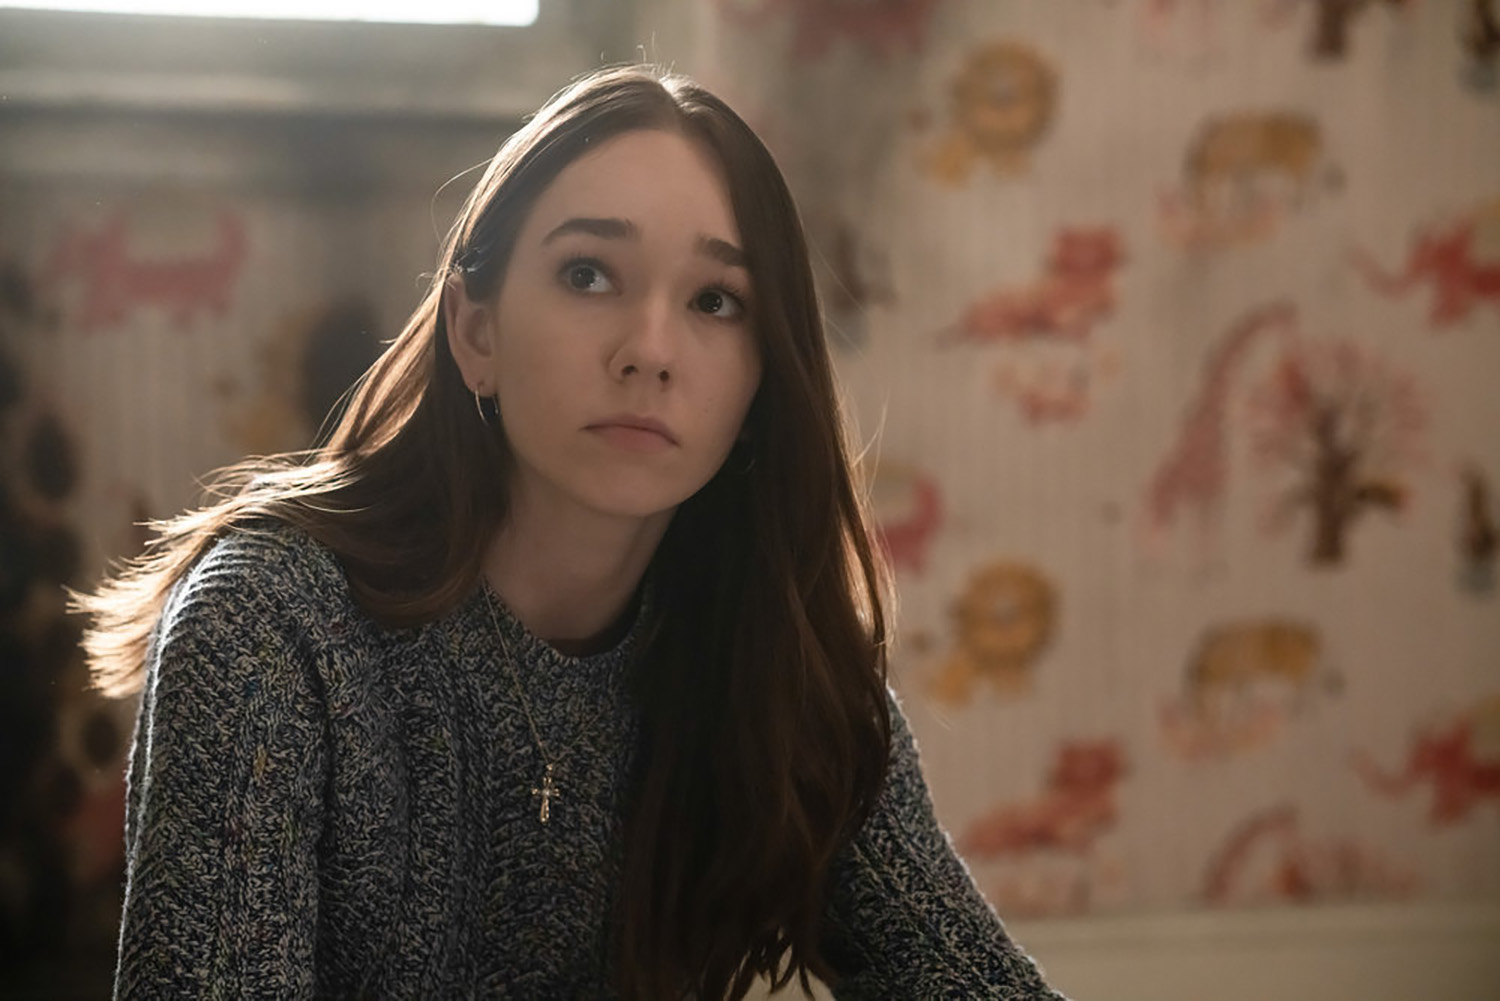 Holly Taylor as Angelina on Manifest, an NBC series that moved to Netflix and remained on the Top 10 charts for several weeks.